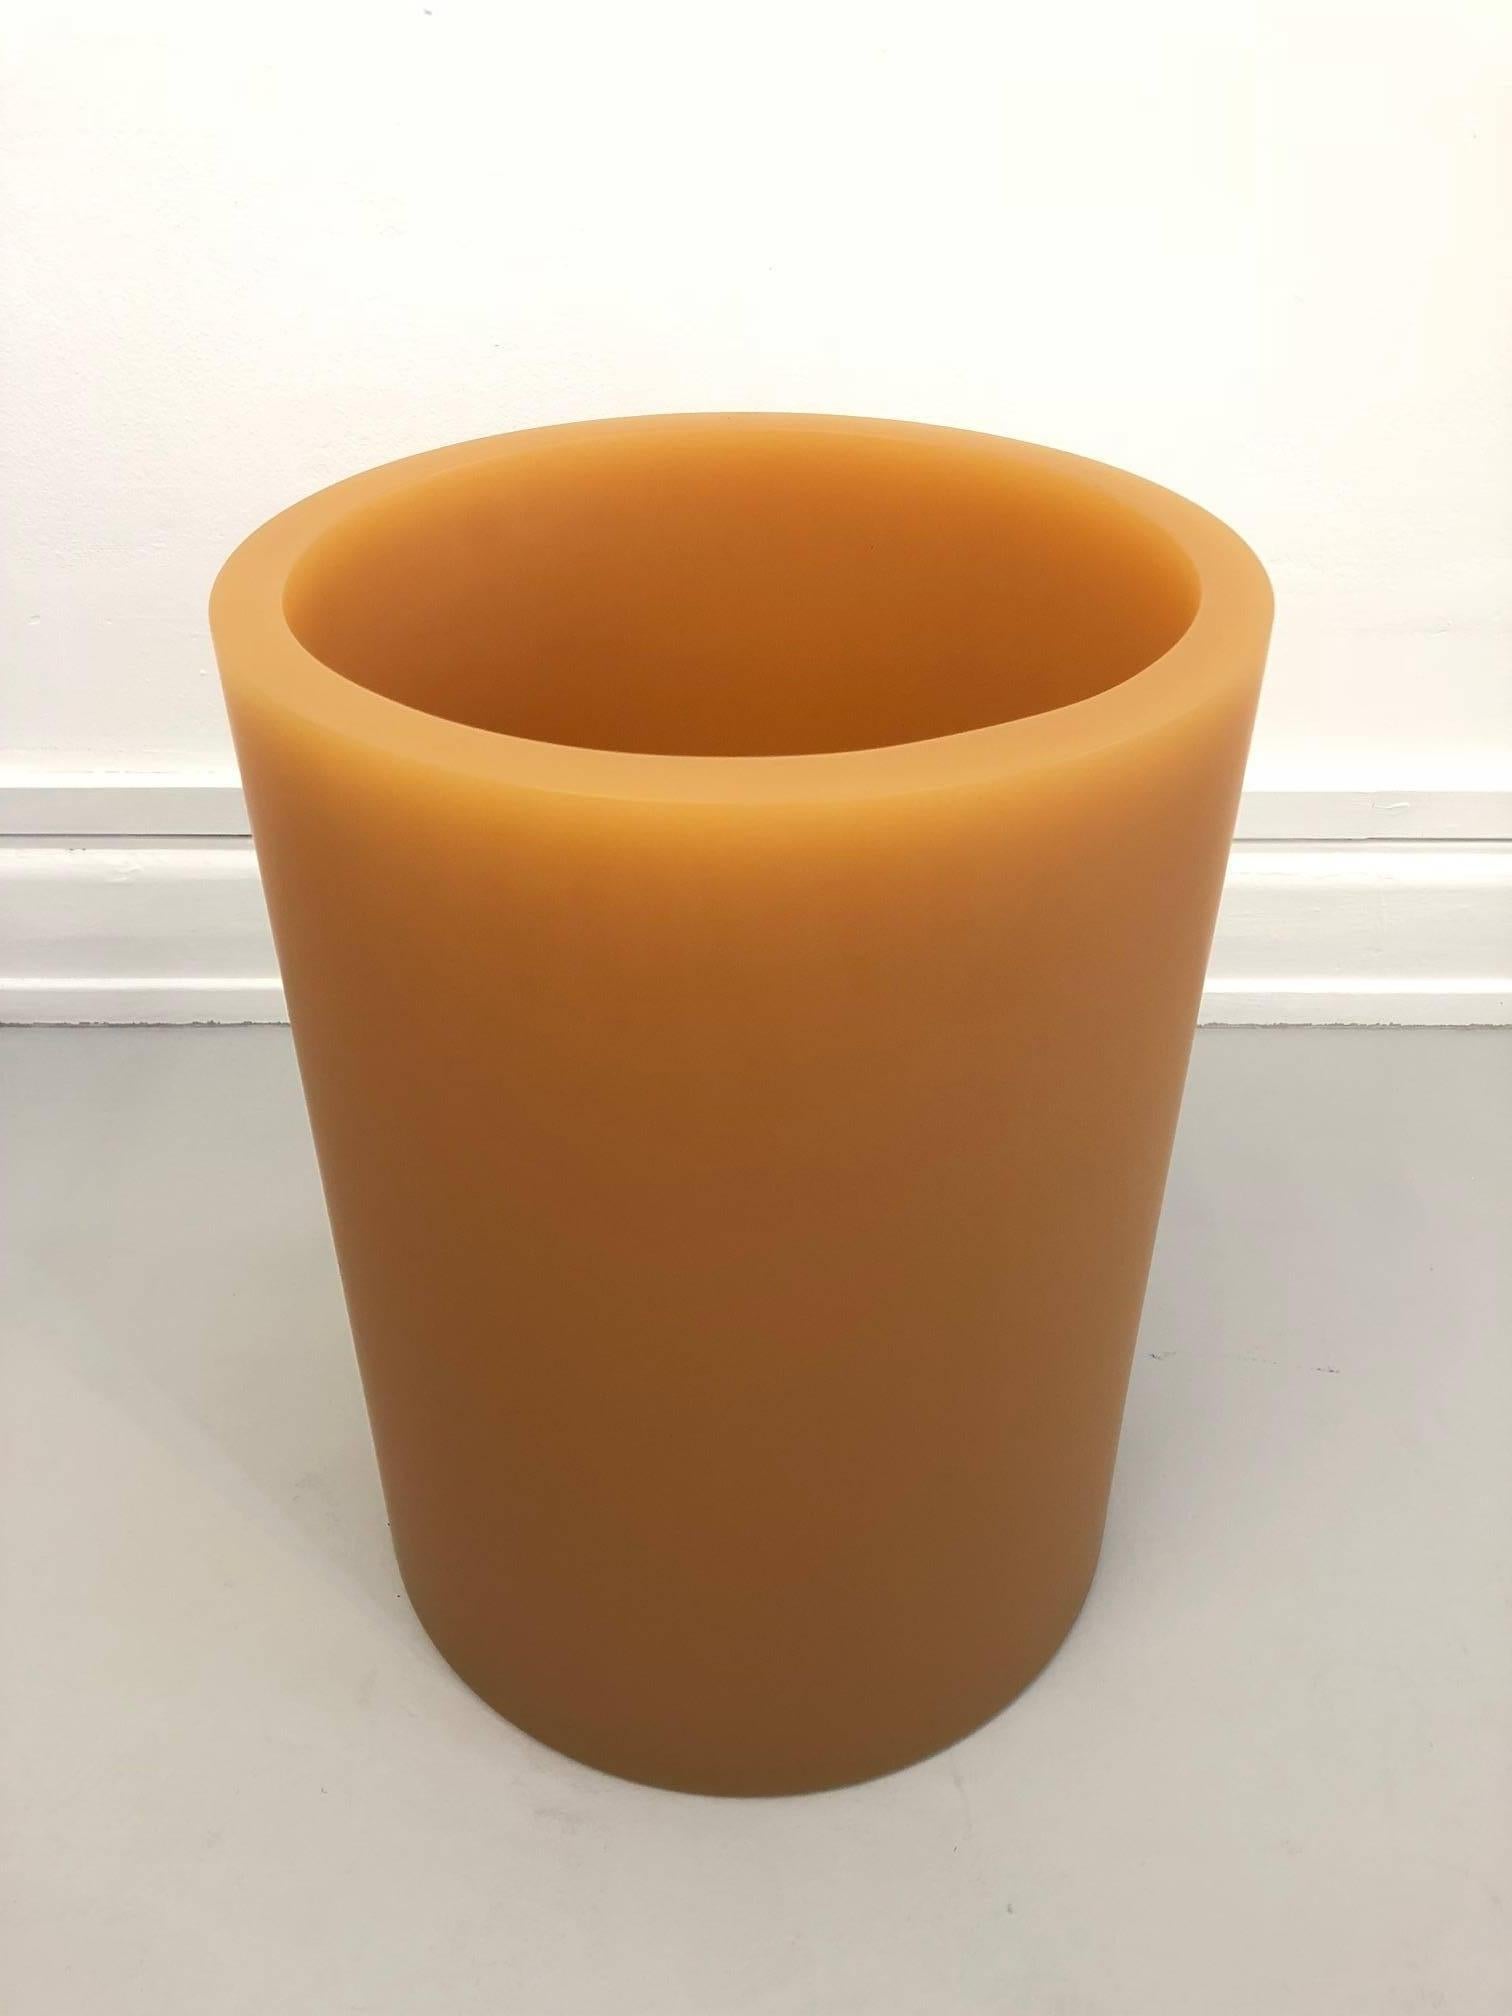 Contemporary Resin Planter by Sabine Marcelis, matte finish In New Condition For Sale In Copenhagen, DK